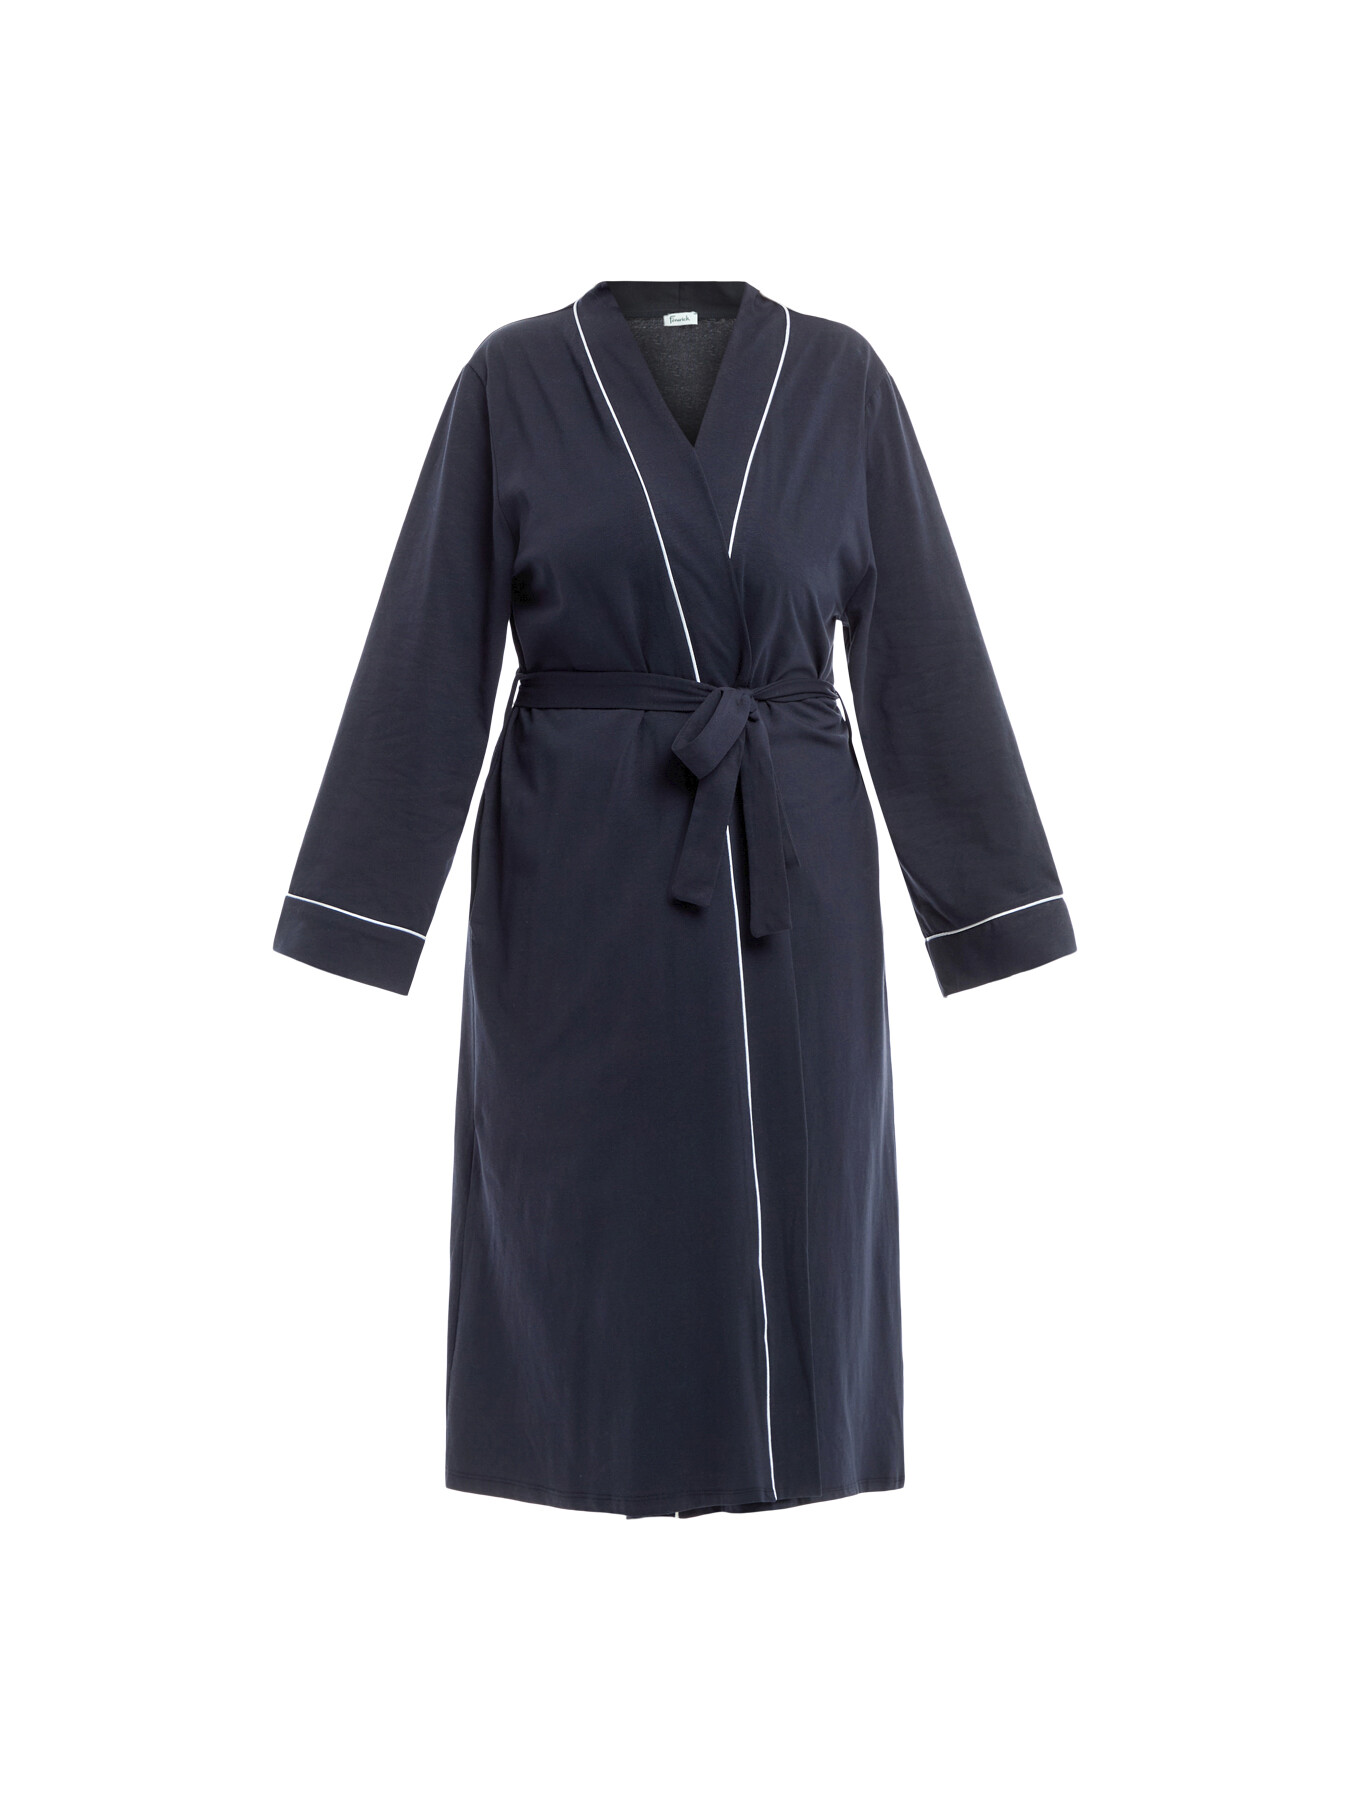 Fenwick At Home Women's Jersey Dressing Gown Navy In Black